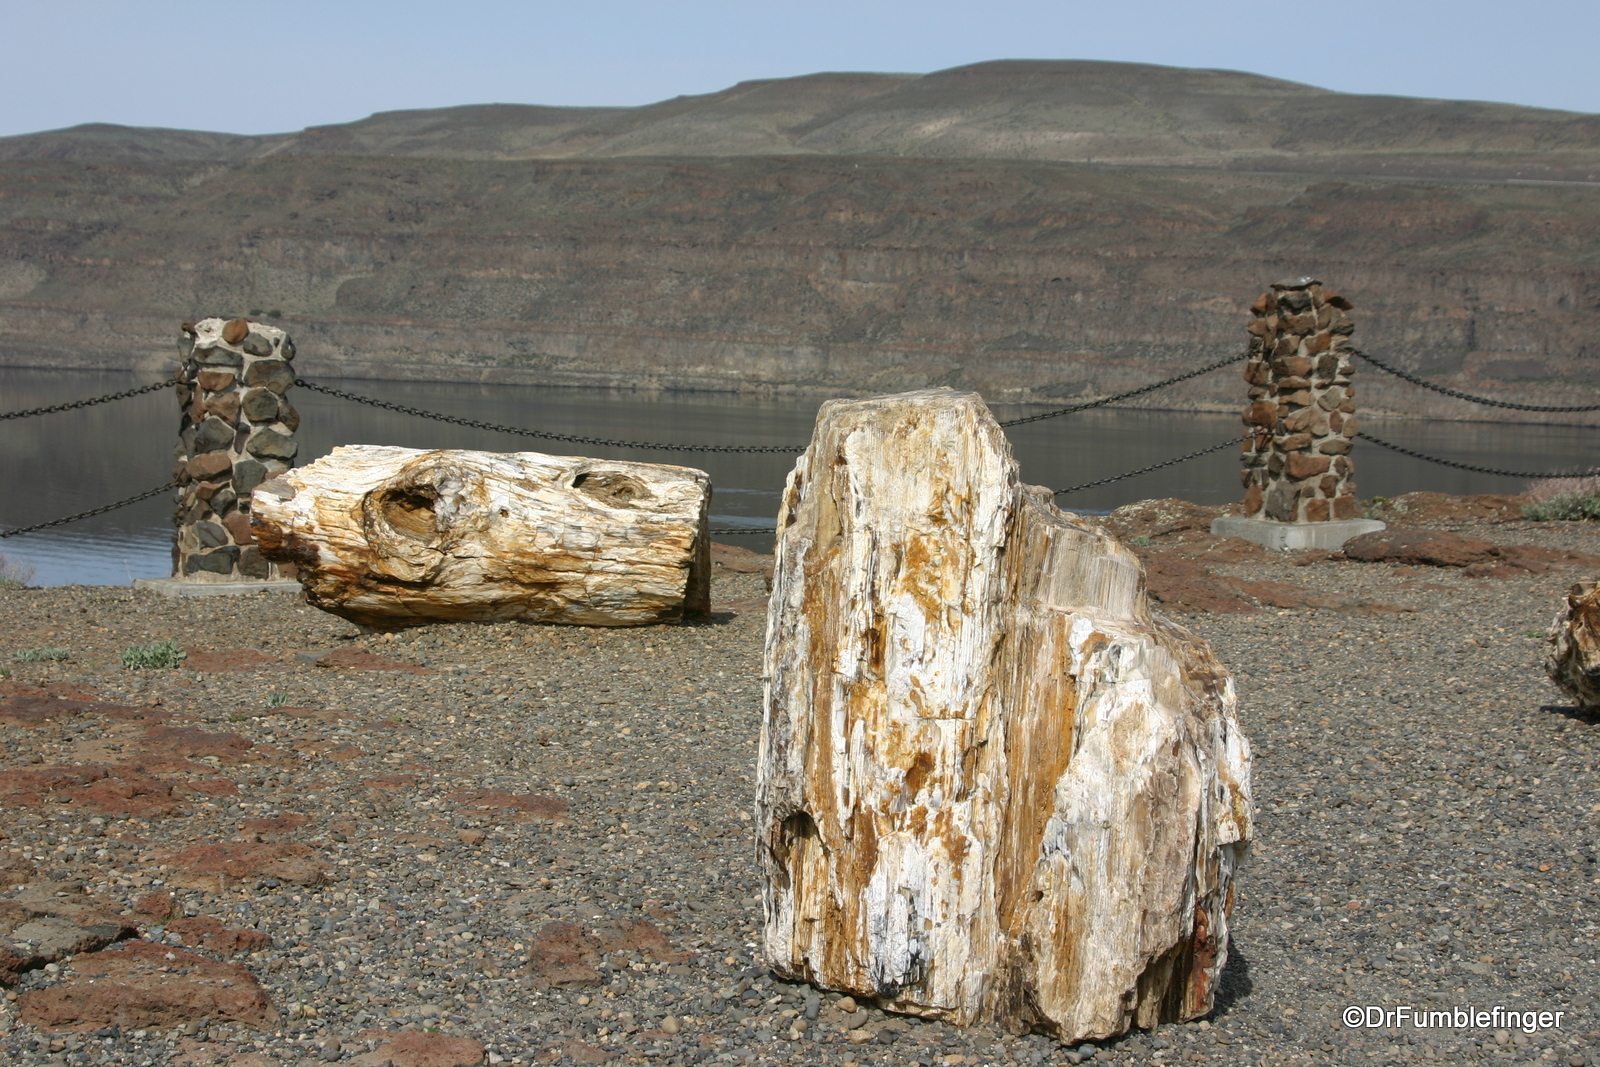 Ginkgo Petrified Forest State Park